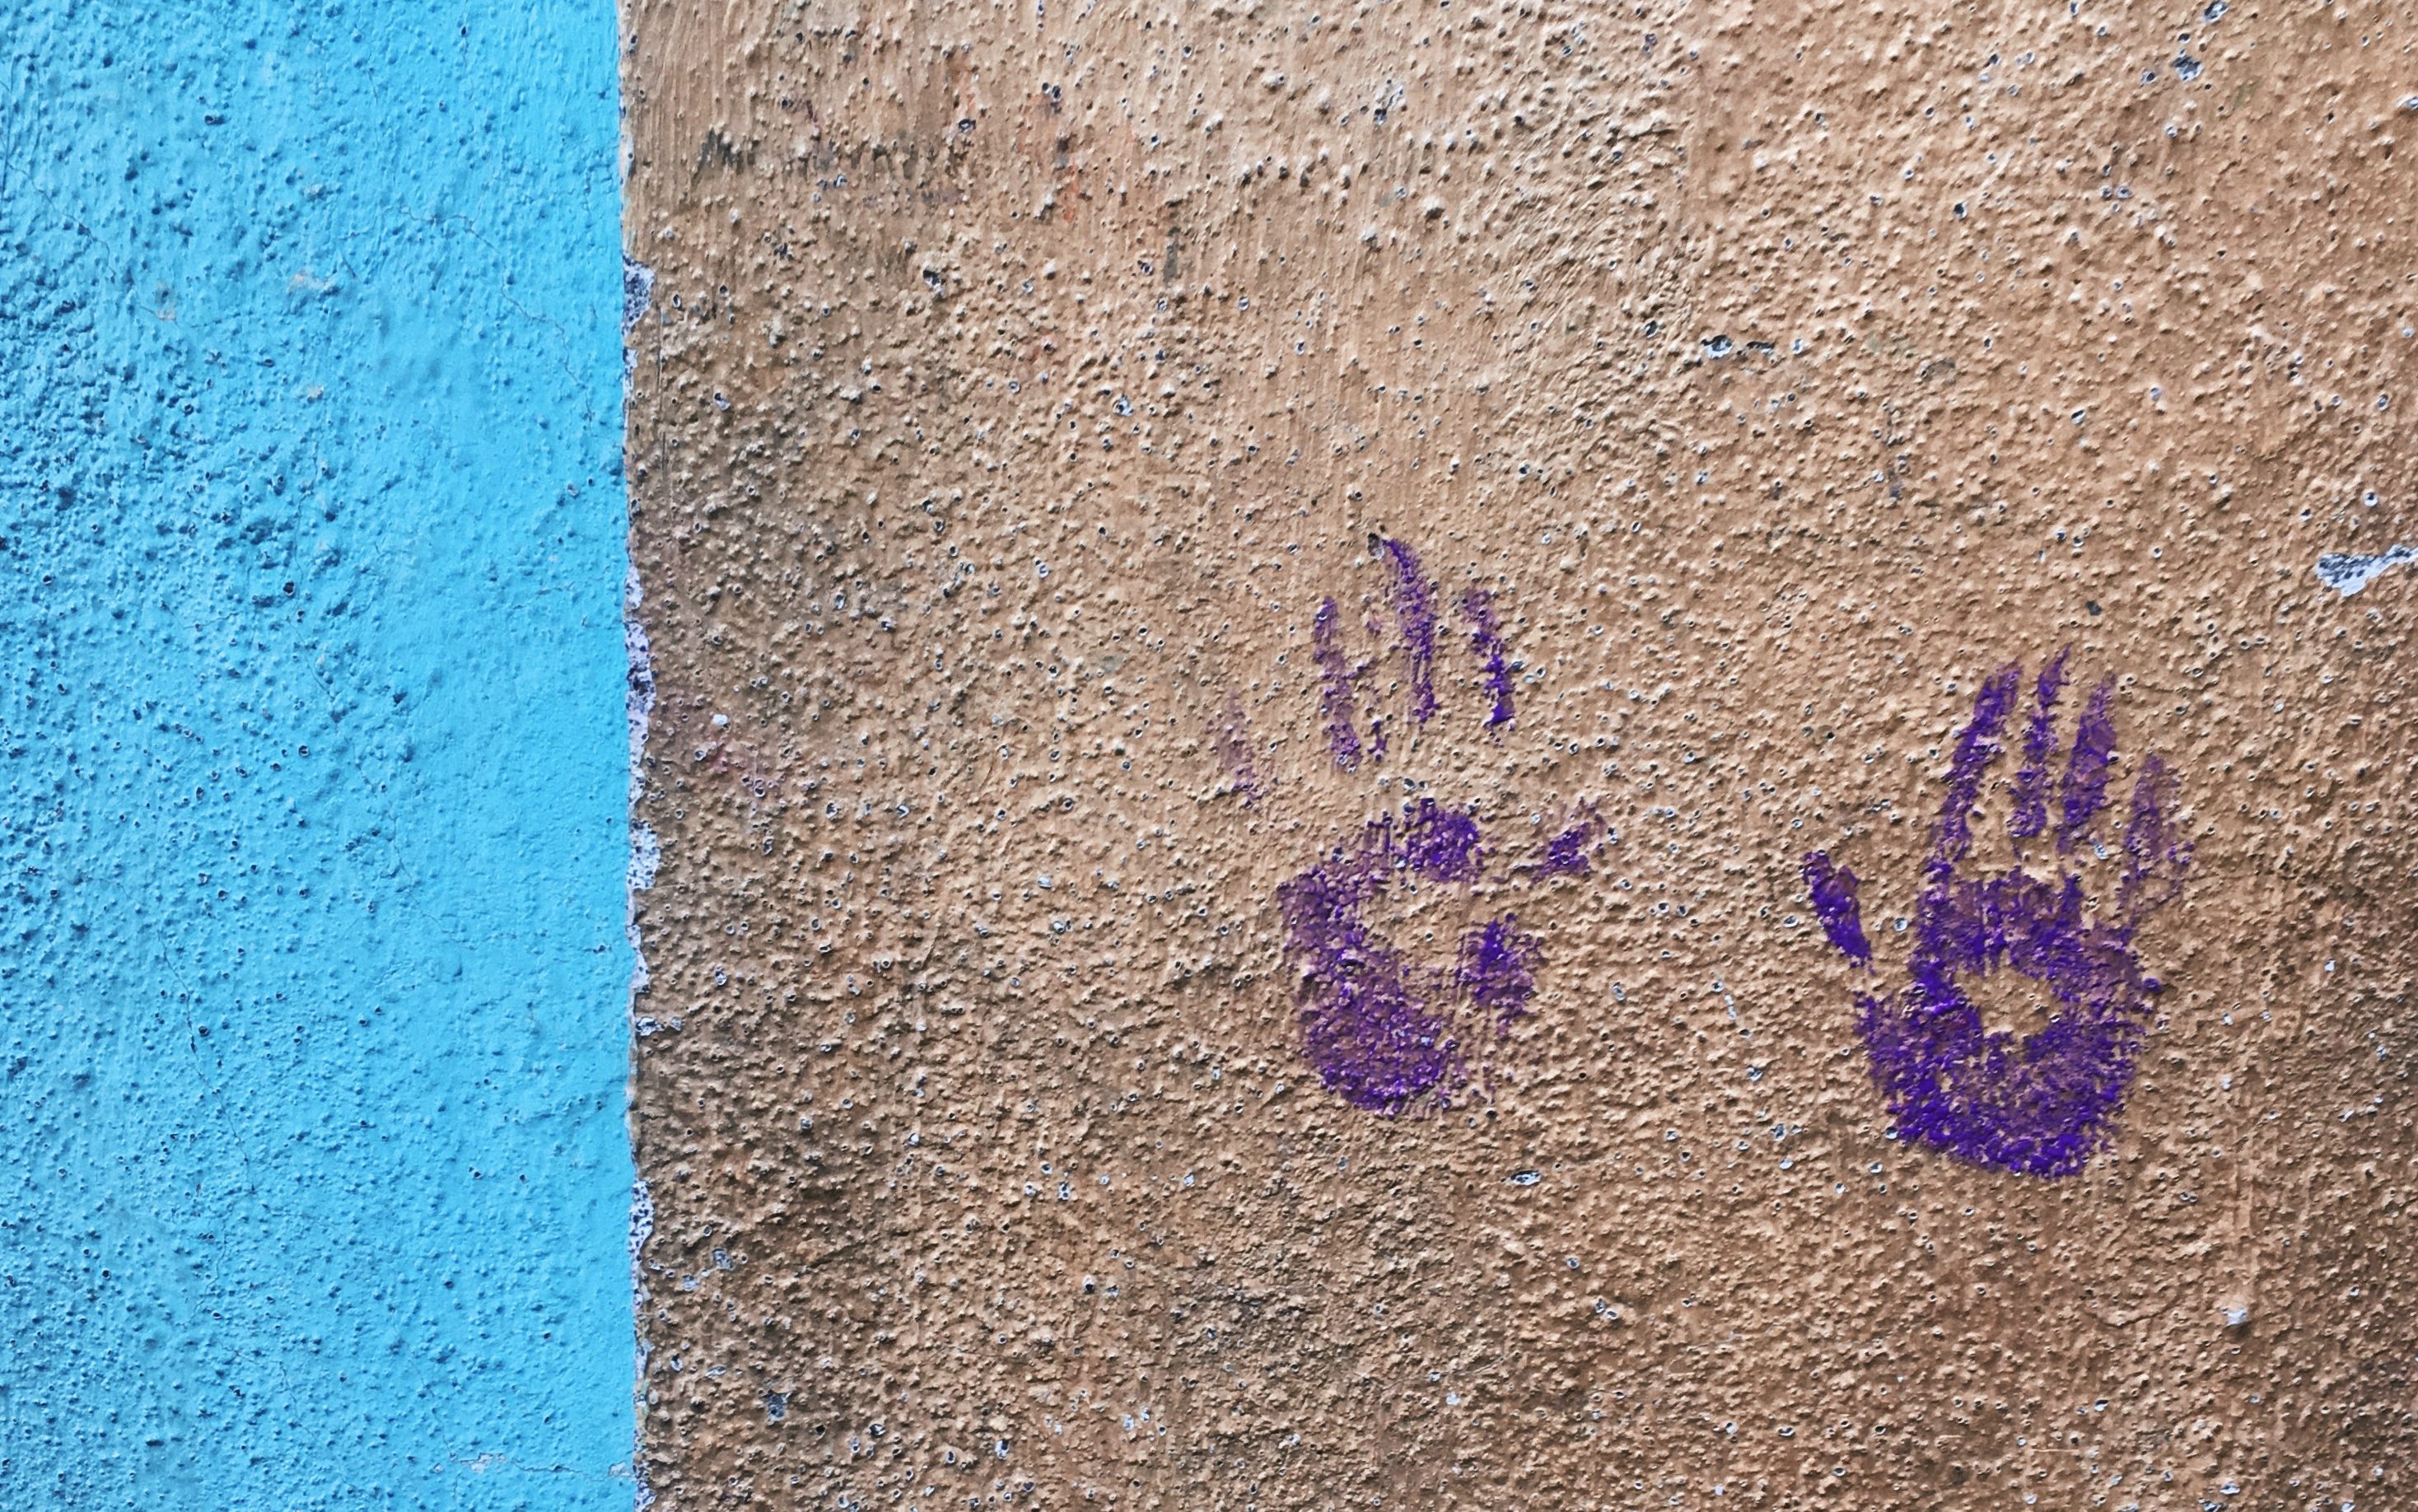 Coloured Hand Prints on a wall in Mumbai's Worli Village Locality